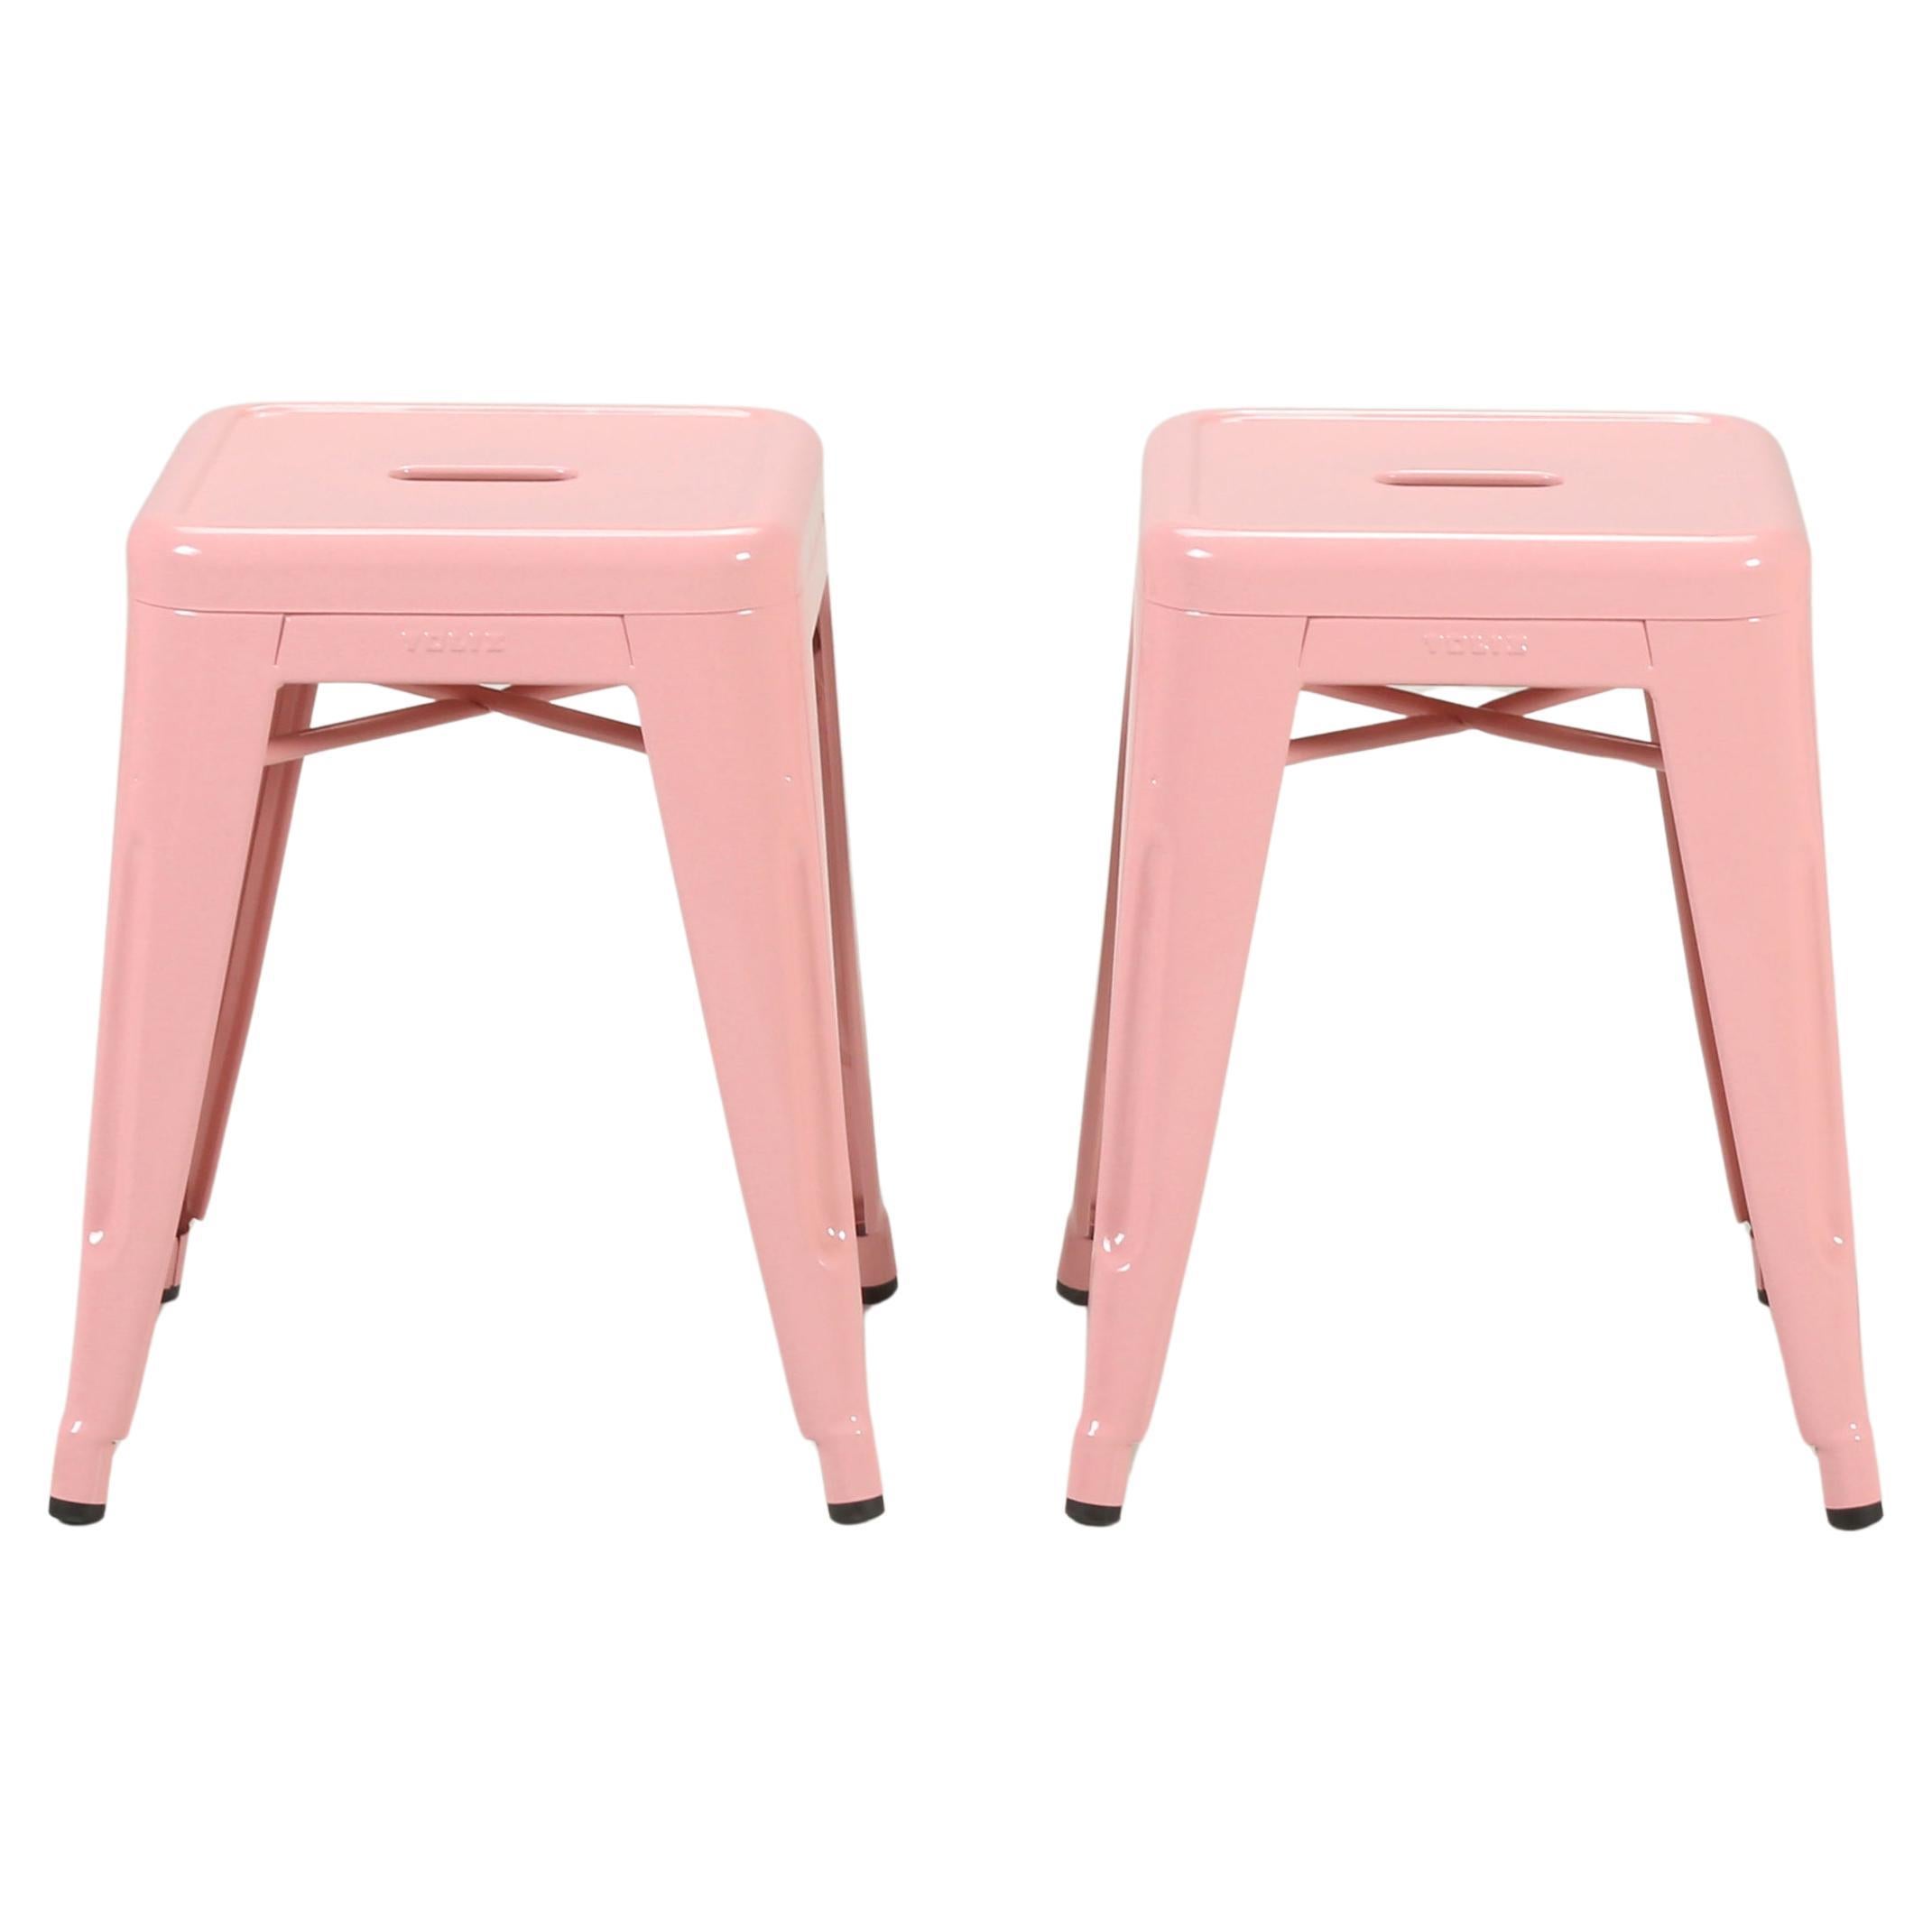 Tolix French Made Stacking Stools, Set of (2) Over (1000) Pieces in Stock For Sale